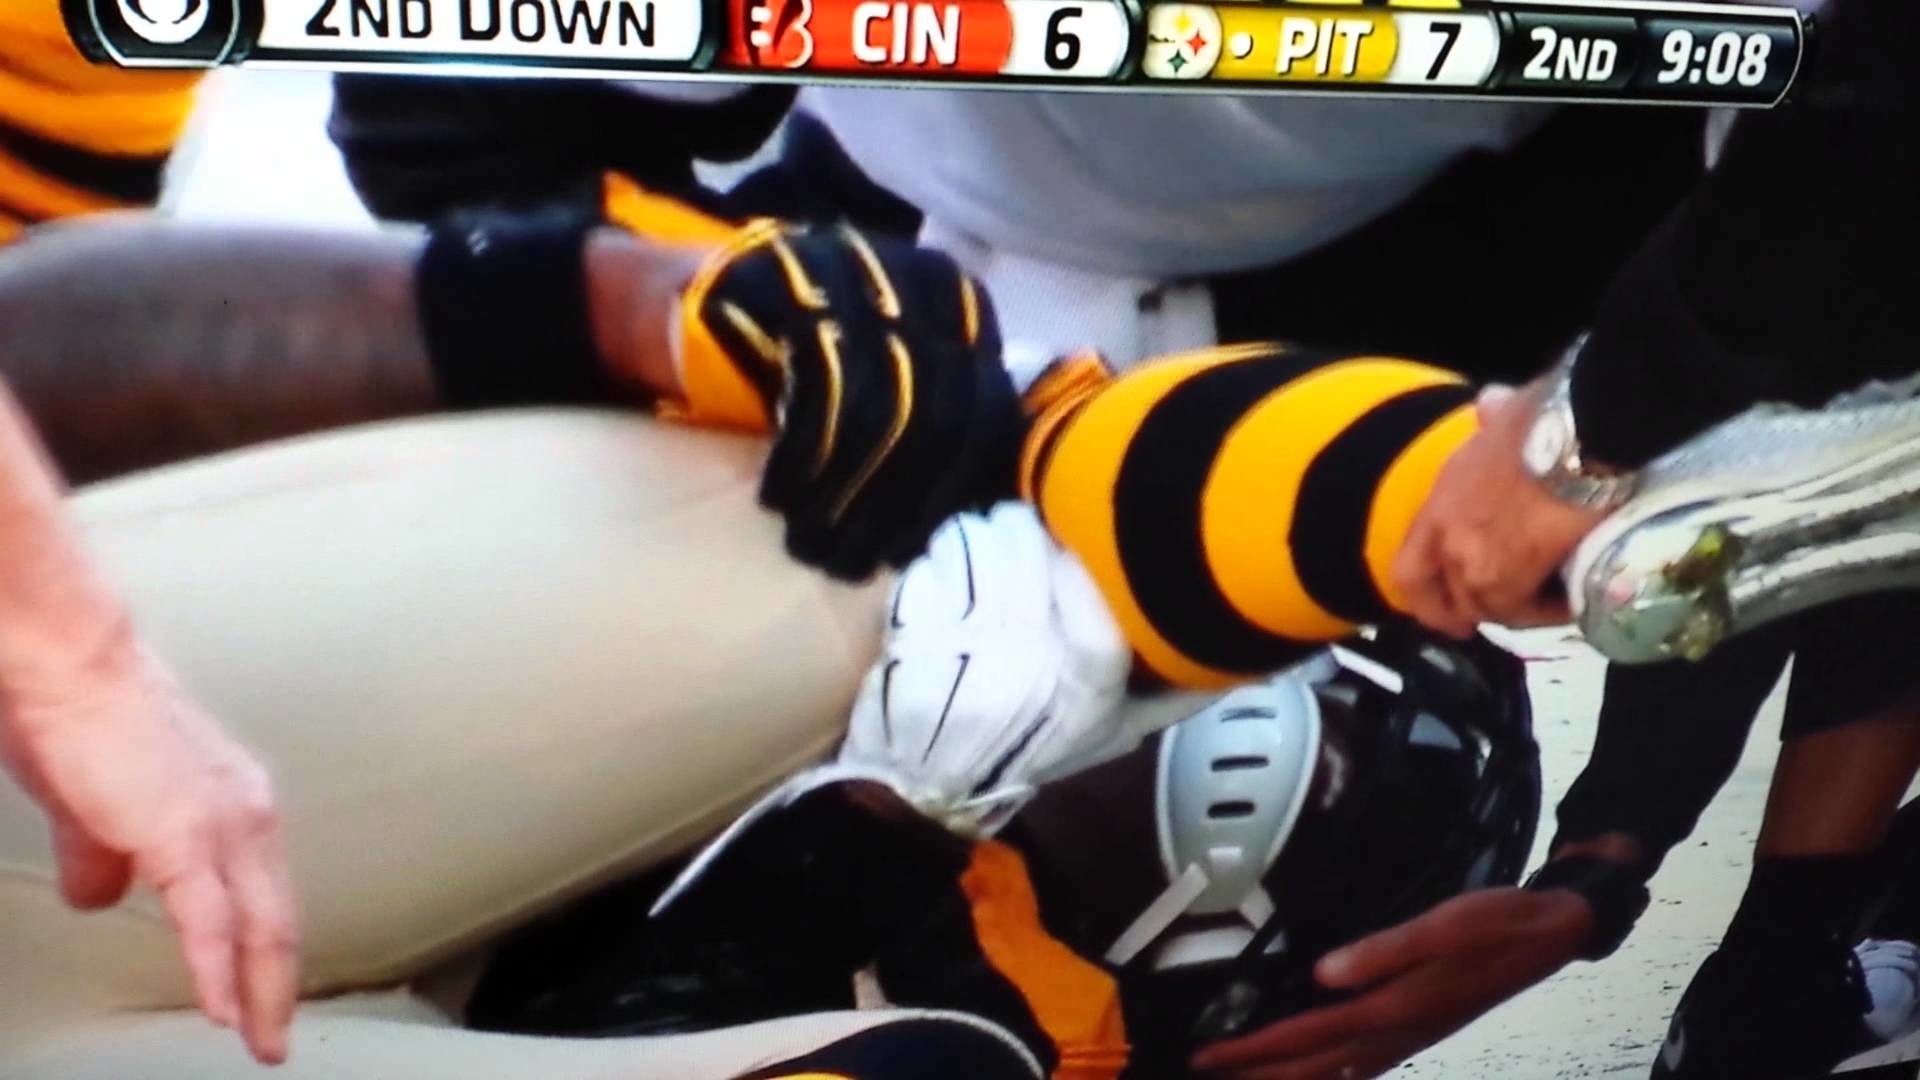 LeVeon Bell Ugly Knee Injury vs Bengals 11 1 2015 week 8 VIDEO – YouTube